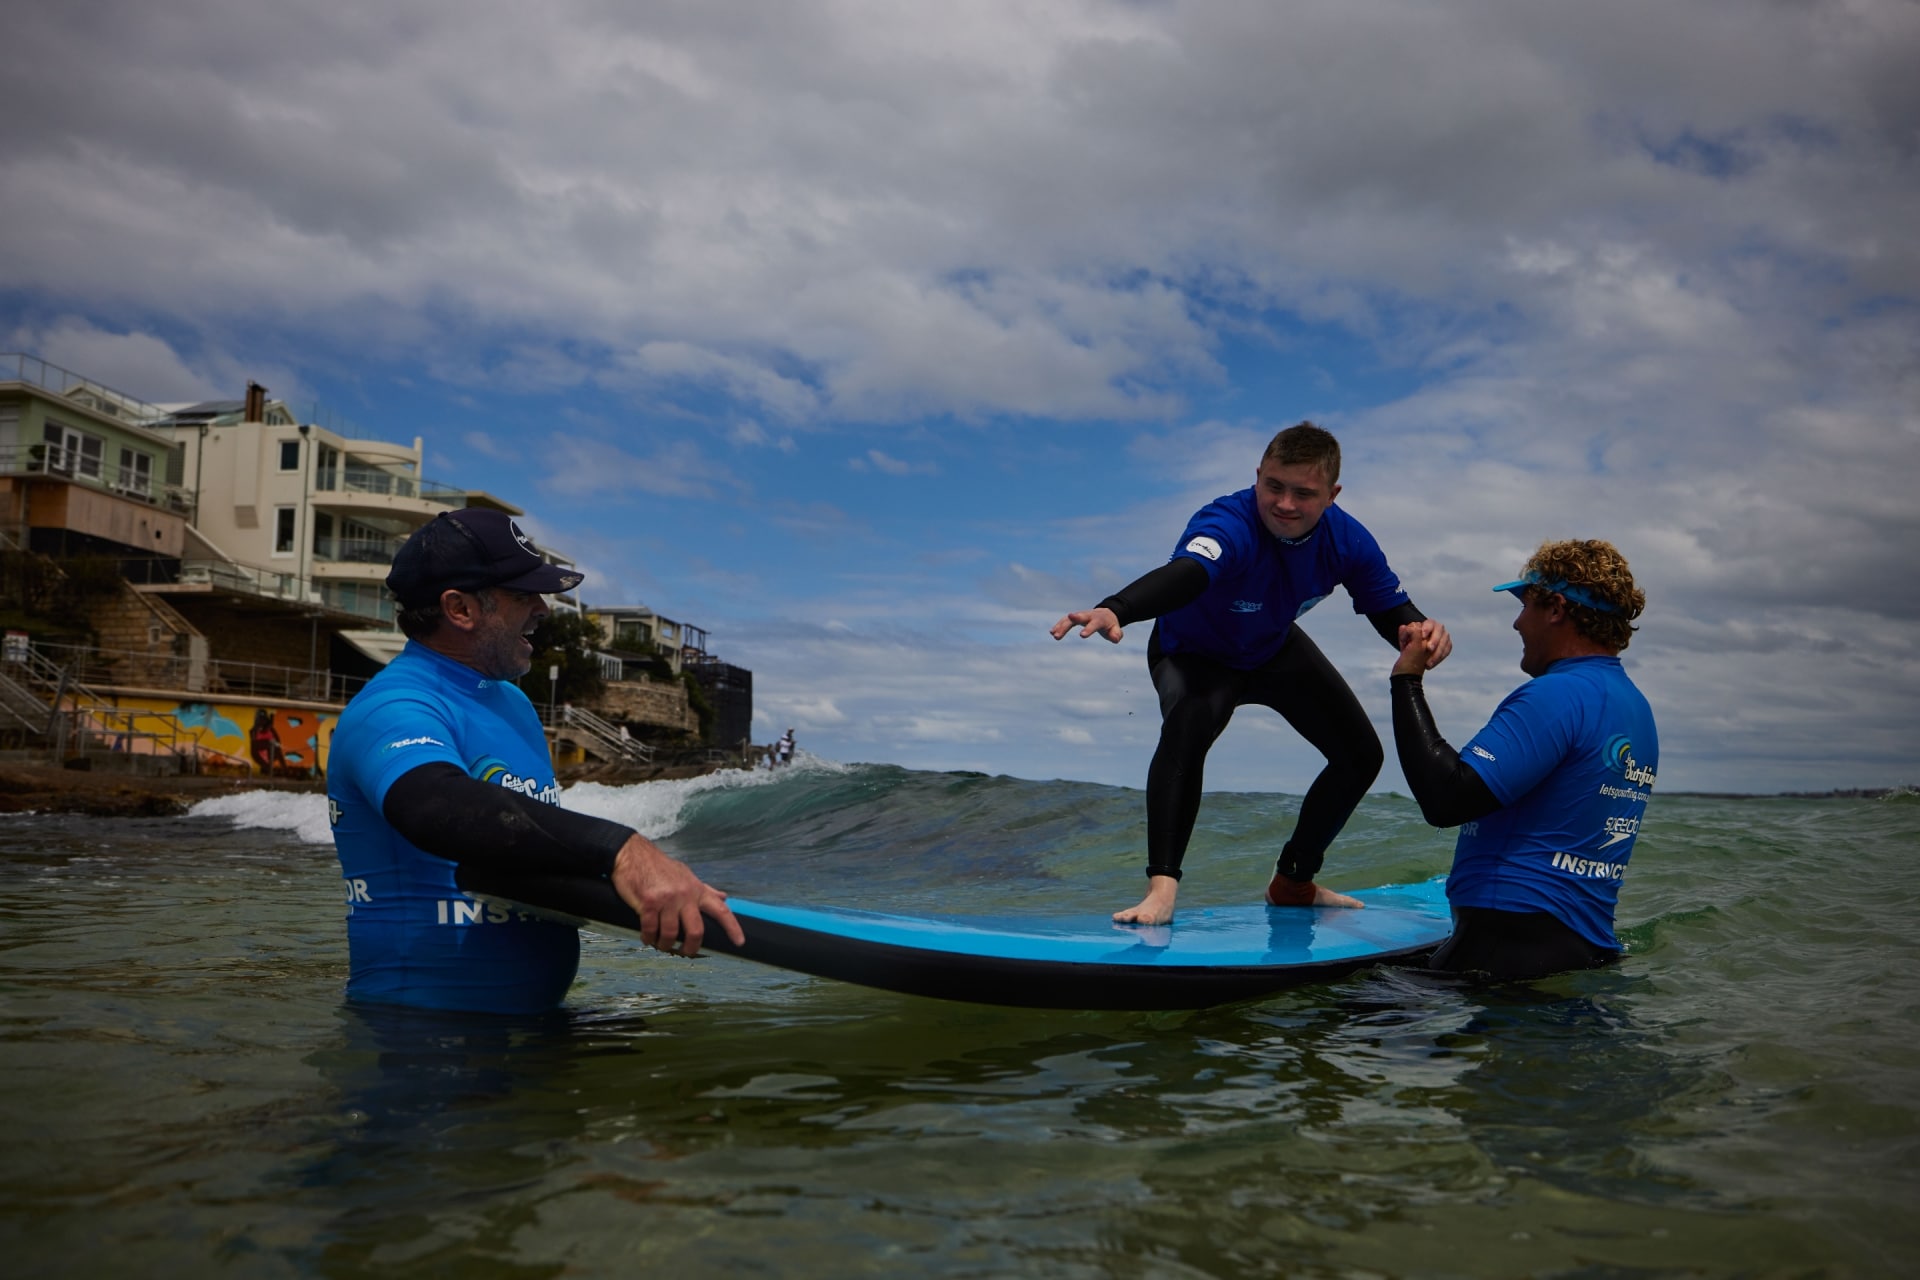 Man with neurodivergence surfing with the help of Let’s Go Surfing instructors, Bondi Beach, Sydney, New South Wales © Tourism Australia